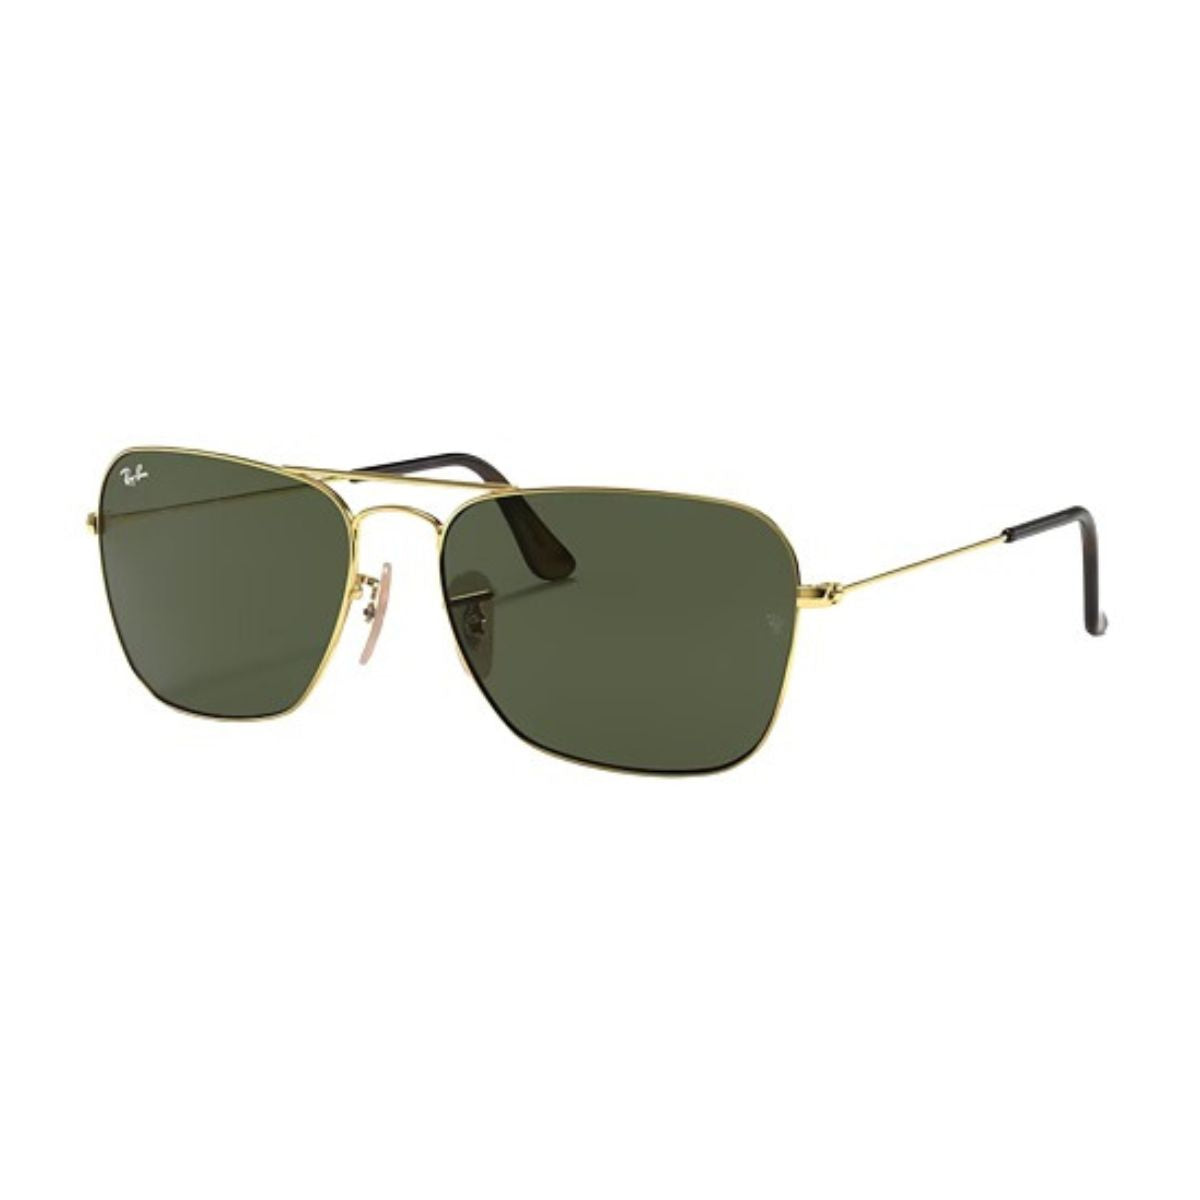 "Buy Online Ray Ban 3136 001/58 Square Sunglass For Men's At Optorium"